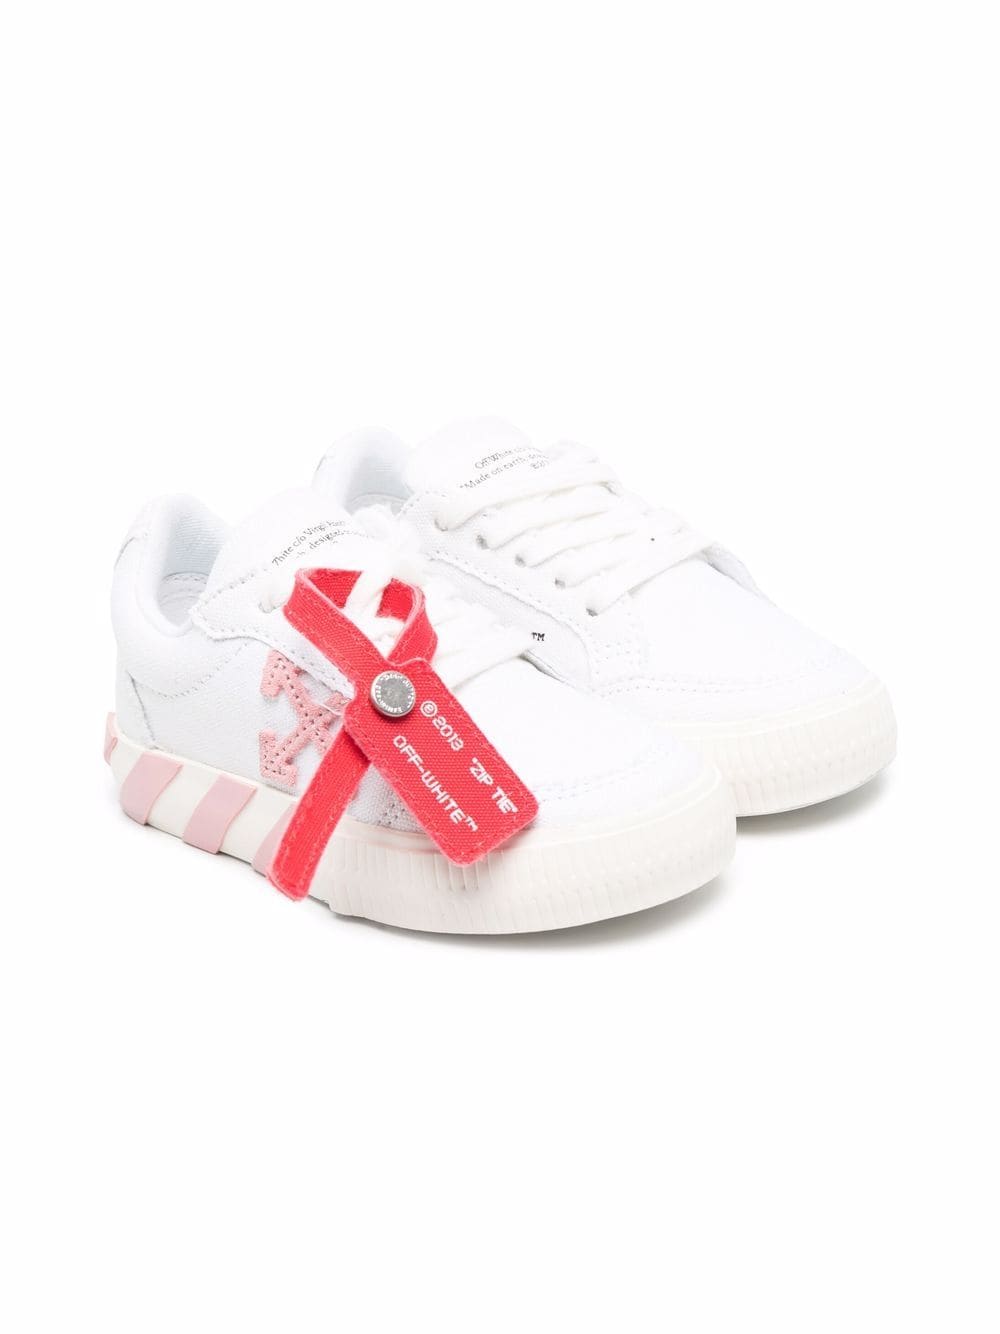 OFF-WHITE KIDS Low-top Vulcanized sneakers White/Pink - MAISONDEFASHION.COM